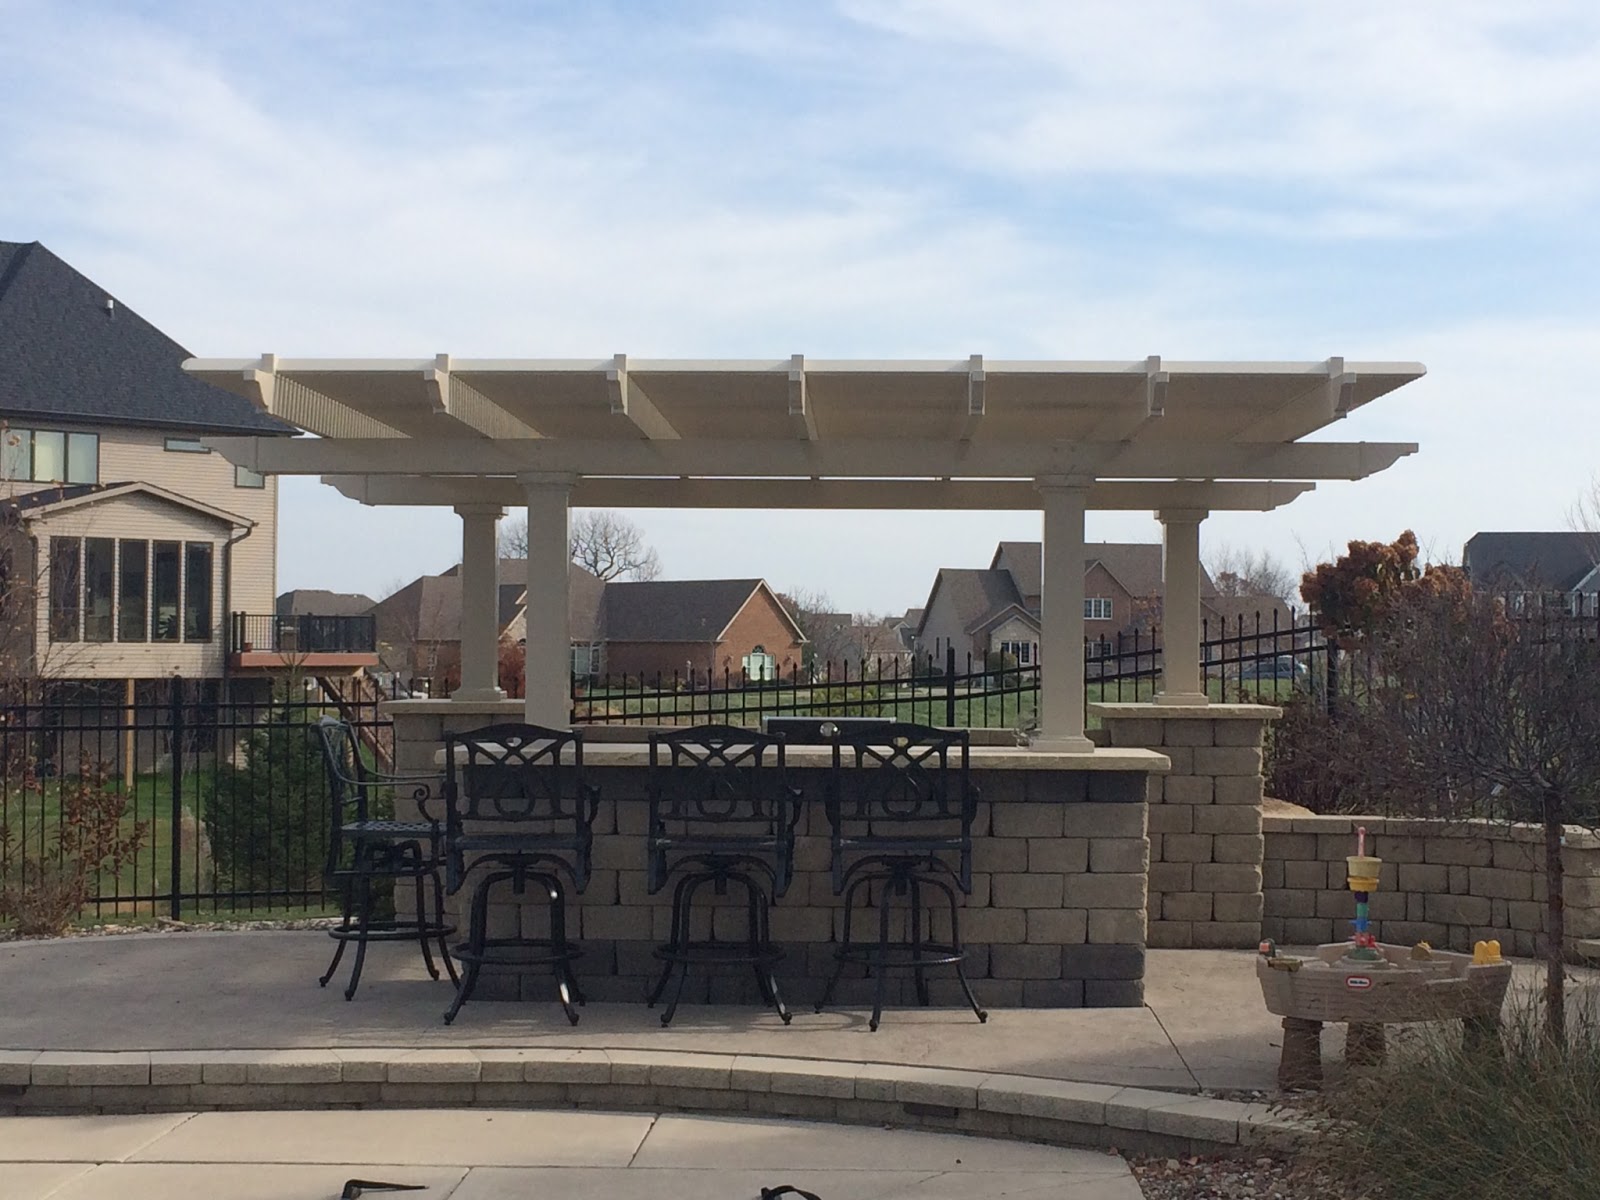 This outdoor bar and the cooking area have large concrete blocks and a tan pergola. There are black high chairs pulled up to the bar area.